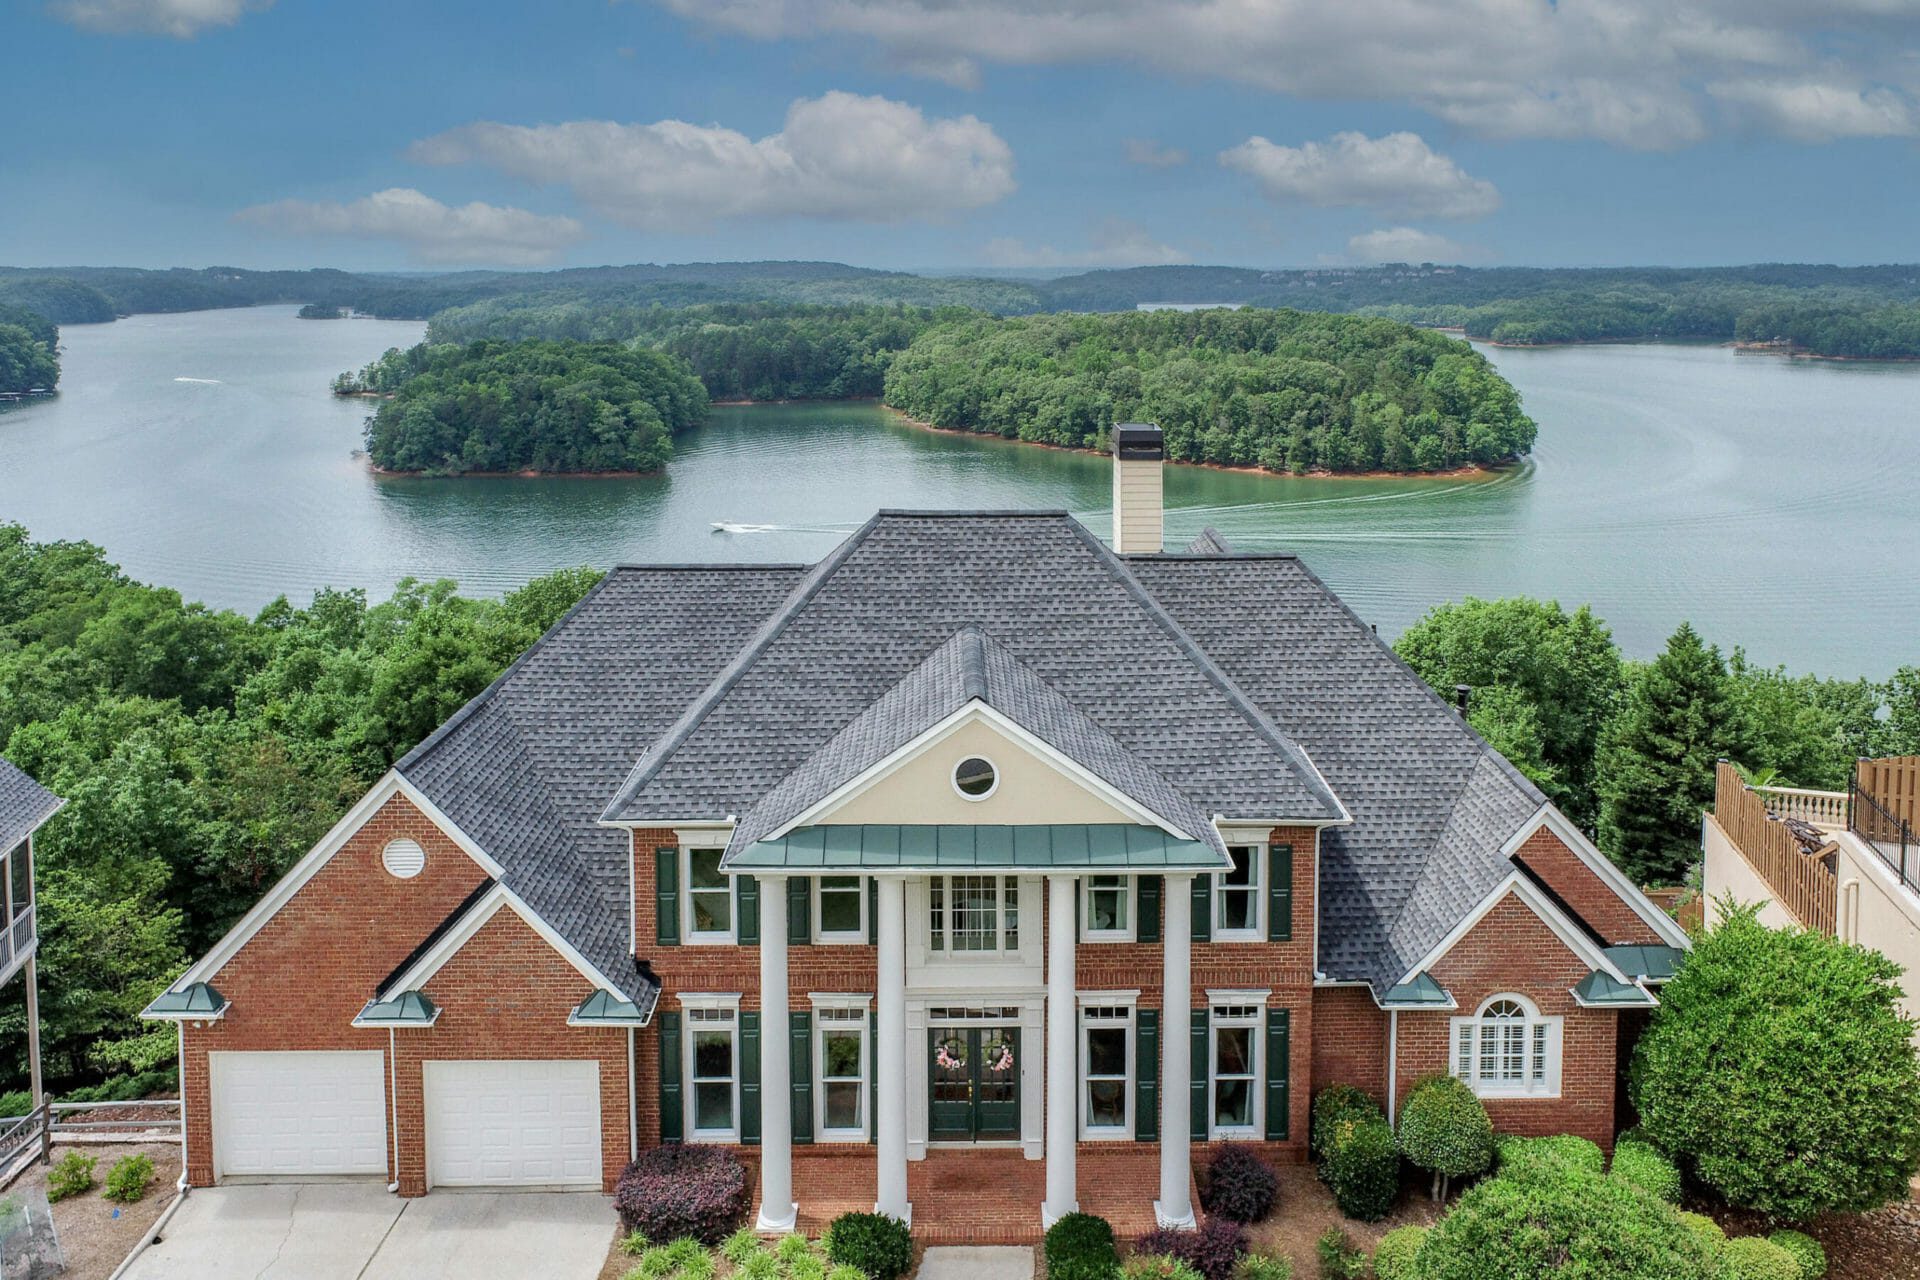 Large ranch style home with columns with view of lake on Lake Lanier